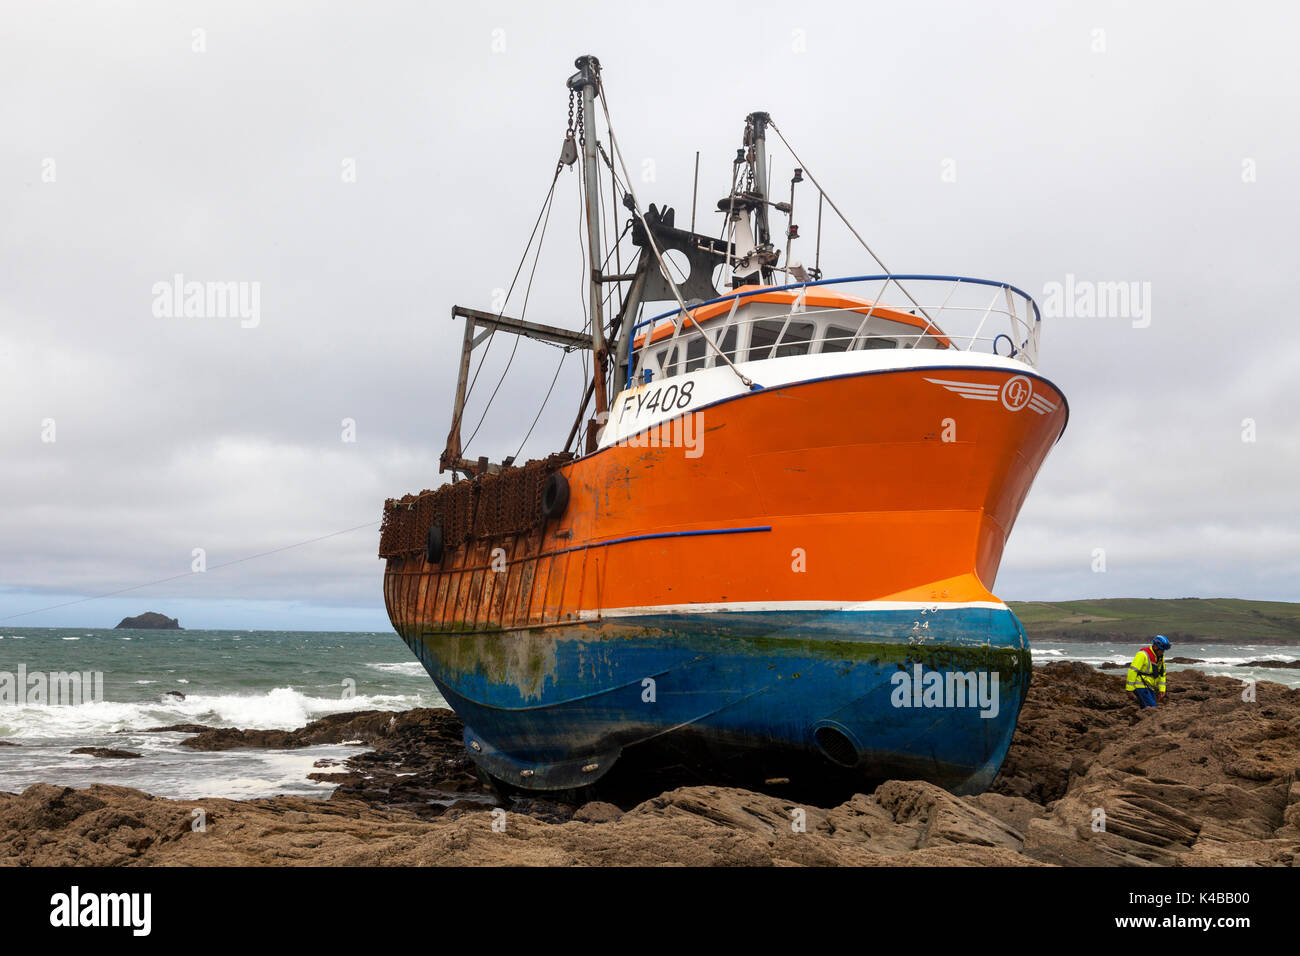 Greenaway Beach, Trebetherick, Cornwall, U.K. 5th September 2017. HM Coastguard watch over a stricken fishing trawler. The Cornish registered Le Men Du, reported to be worth £1M (GBP) ran aground on Tuesday morning. The vessel was re-floated at high tide Tuesday evening. Credit: Mark Richardson/Alamy Live News Stock Photo